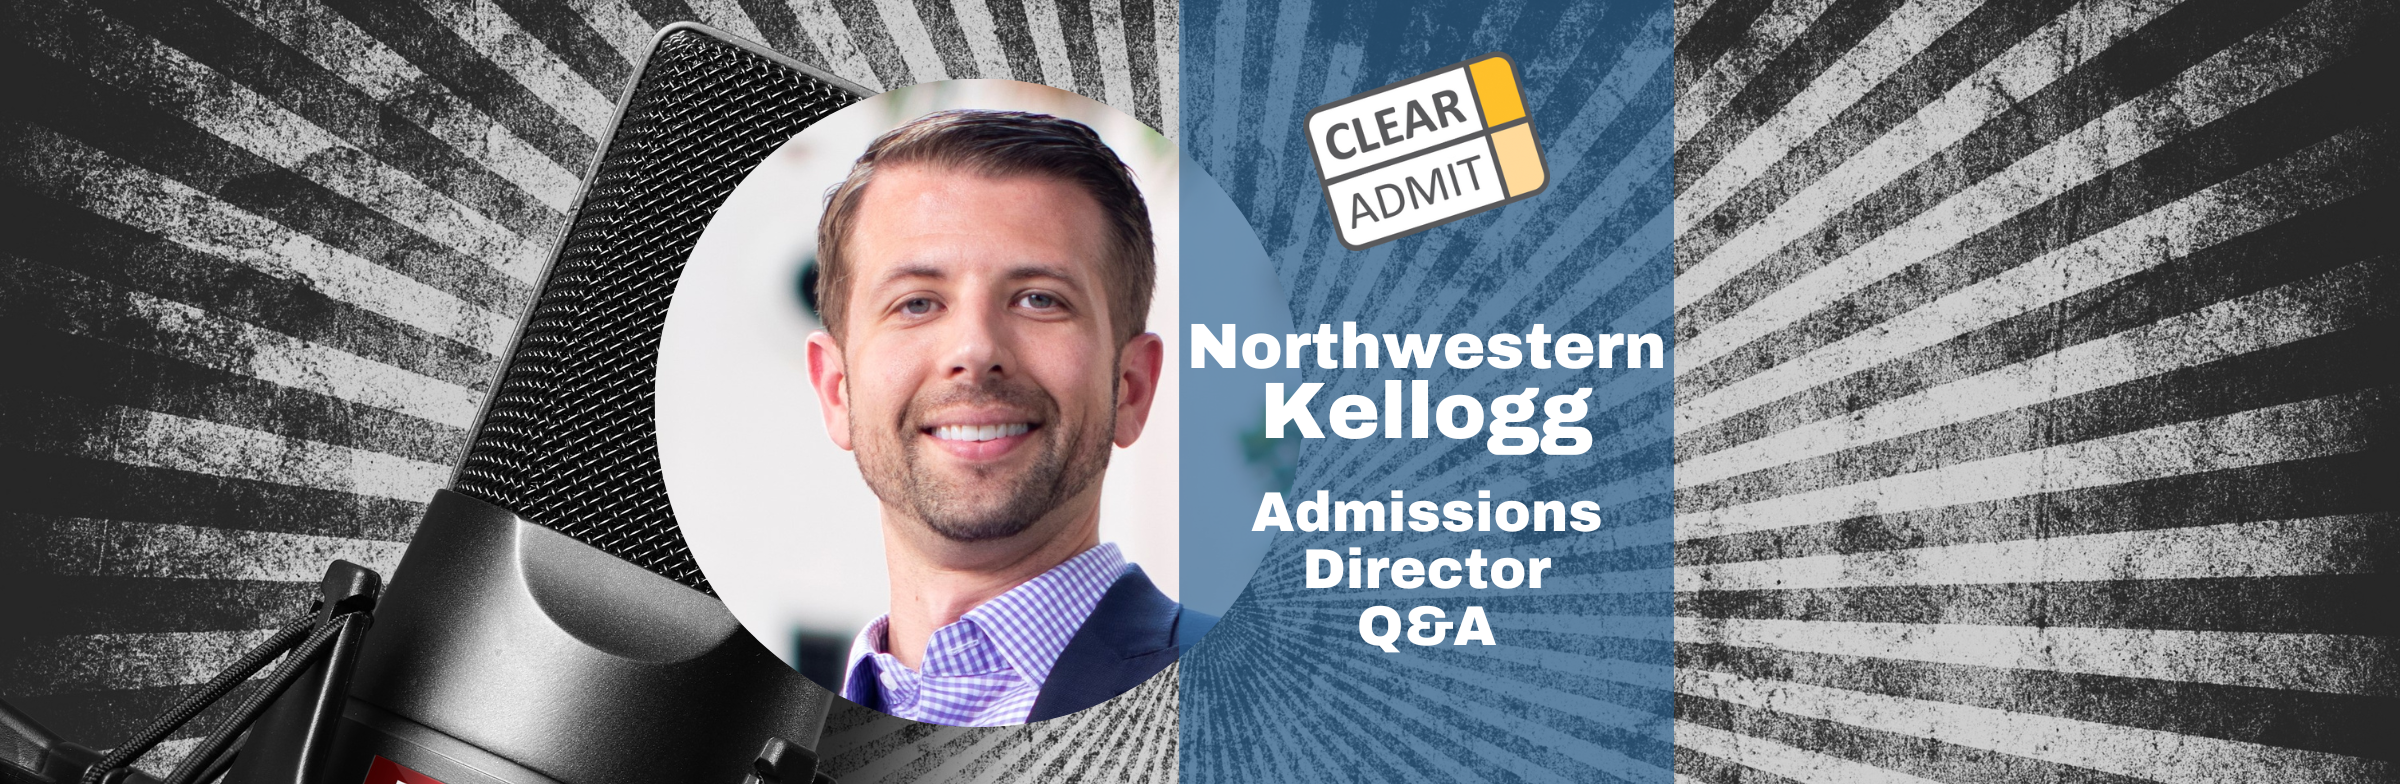 Image for Admissions Director Q&A: Steve Thompson of Northwestern Kellogg